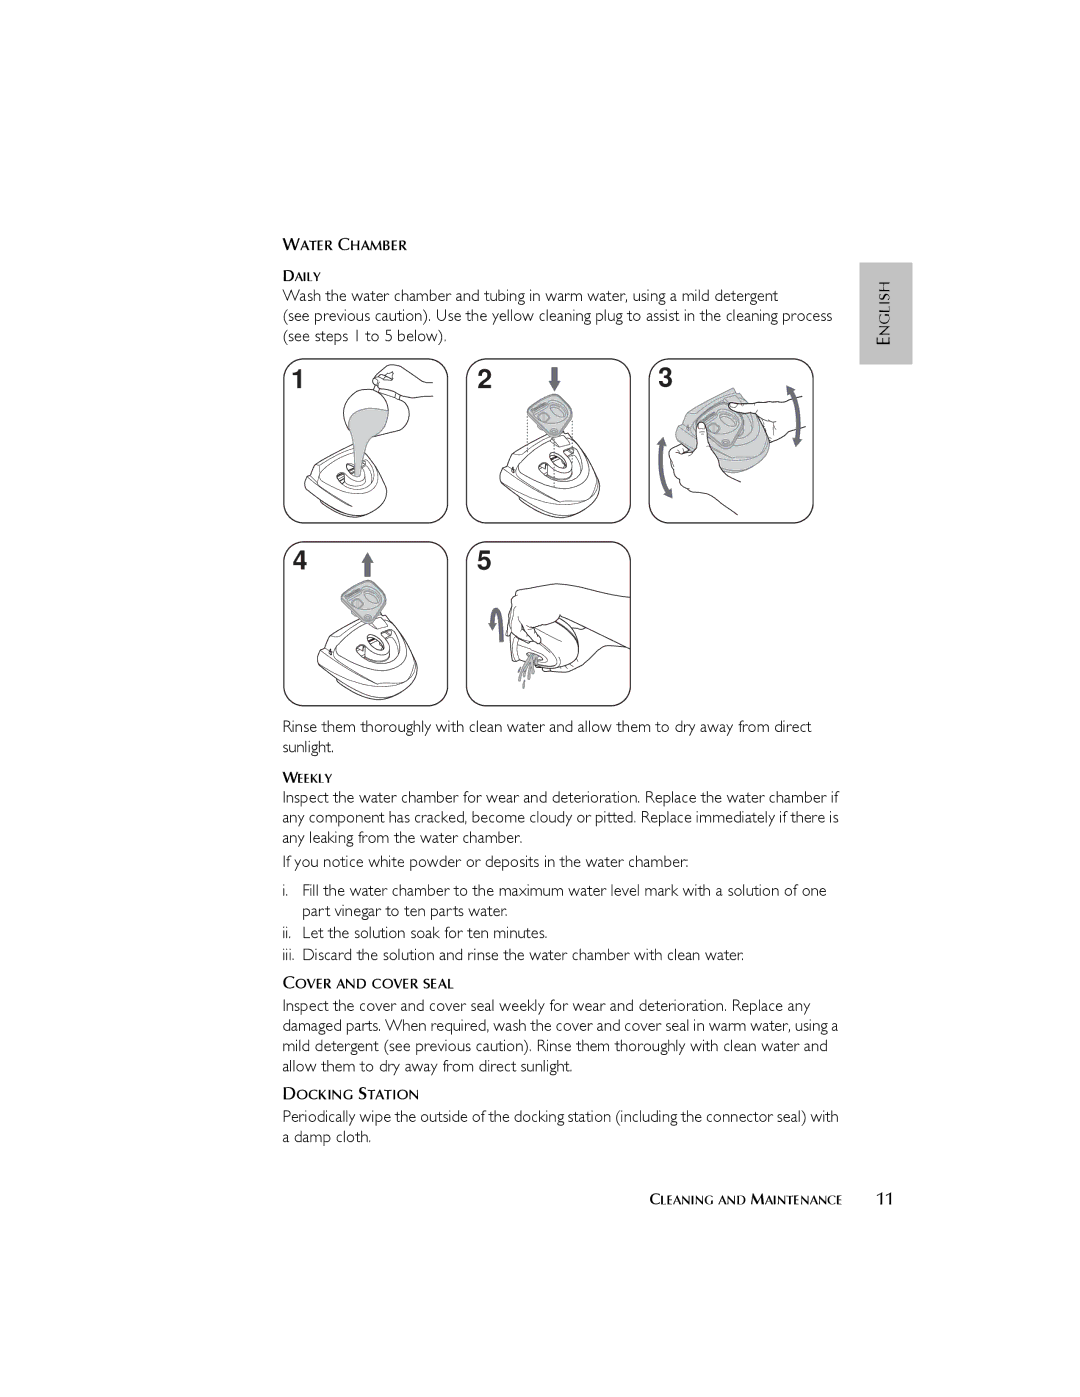 ResMed 3I user manual Water Chamber 